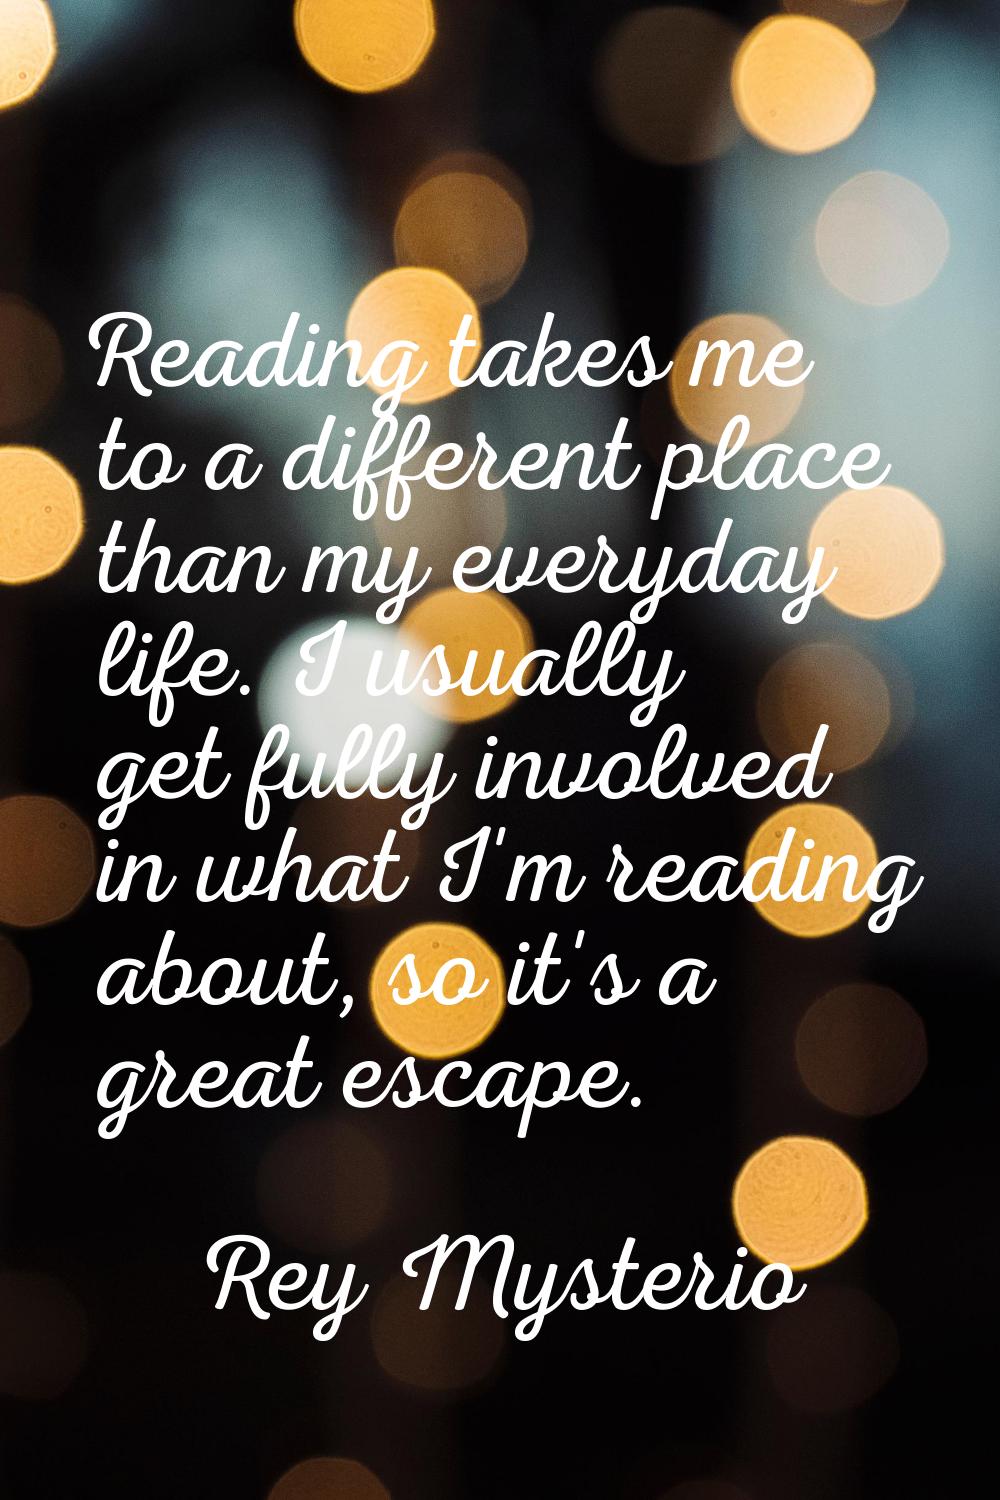 Reading takes me to a different place than my everyday life. I usually get fully involved in what I